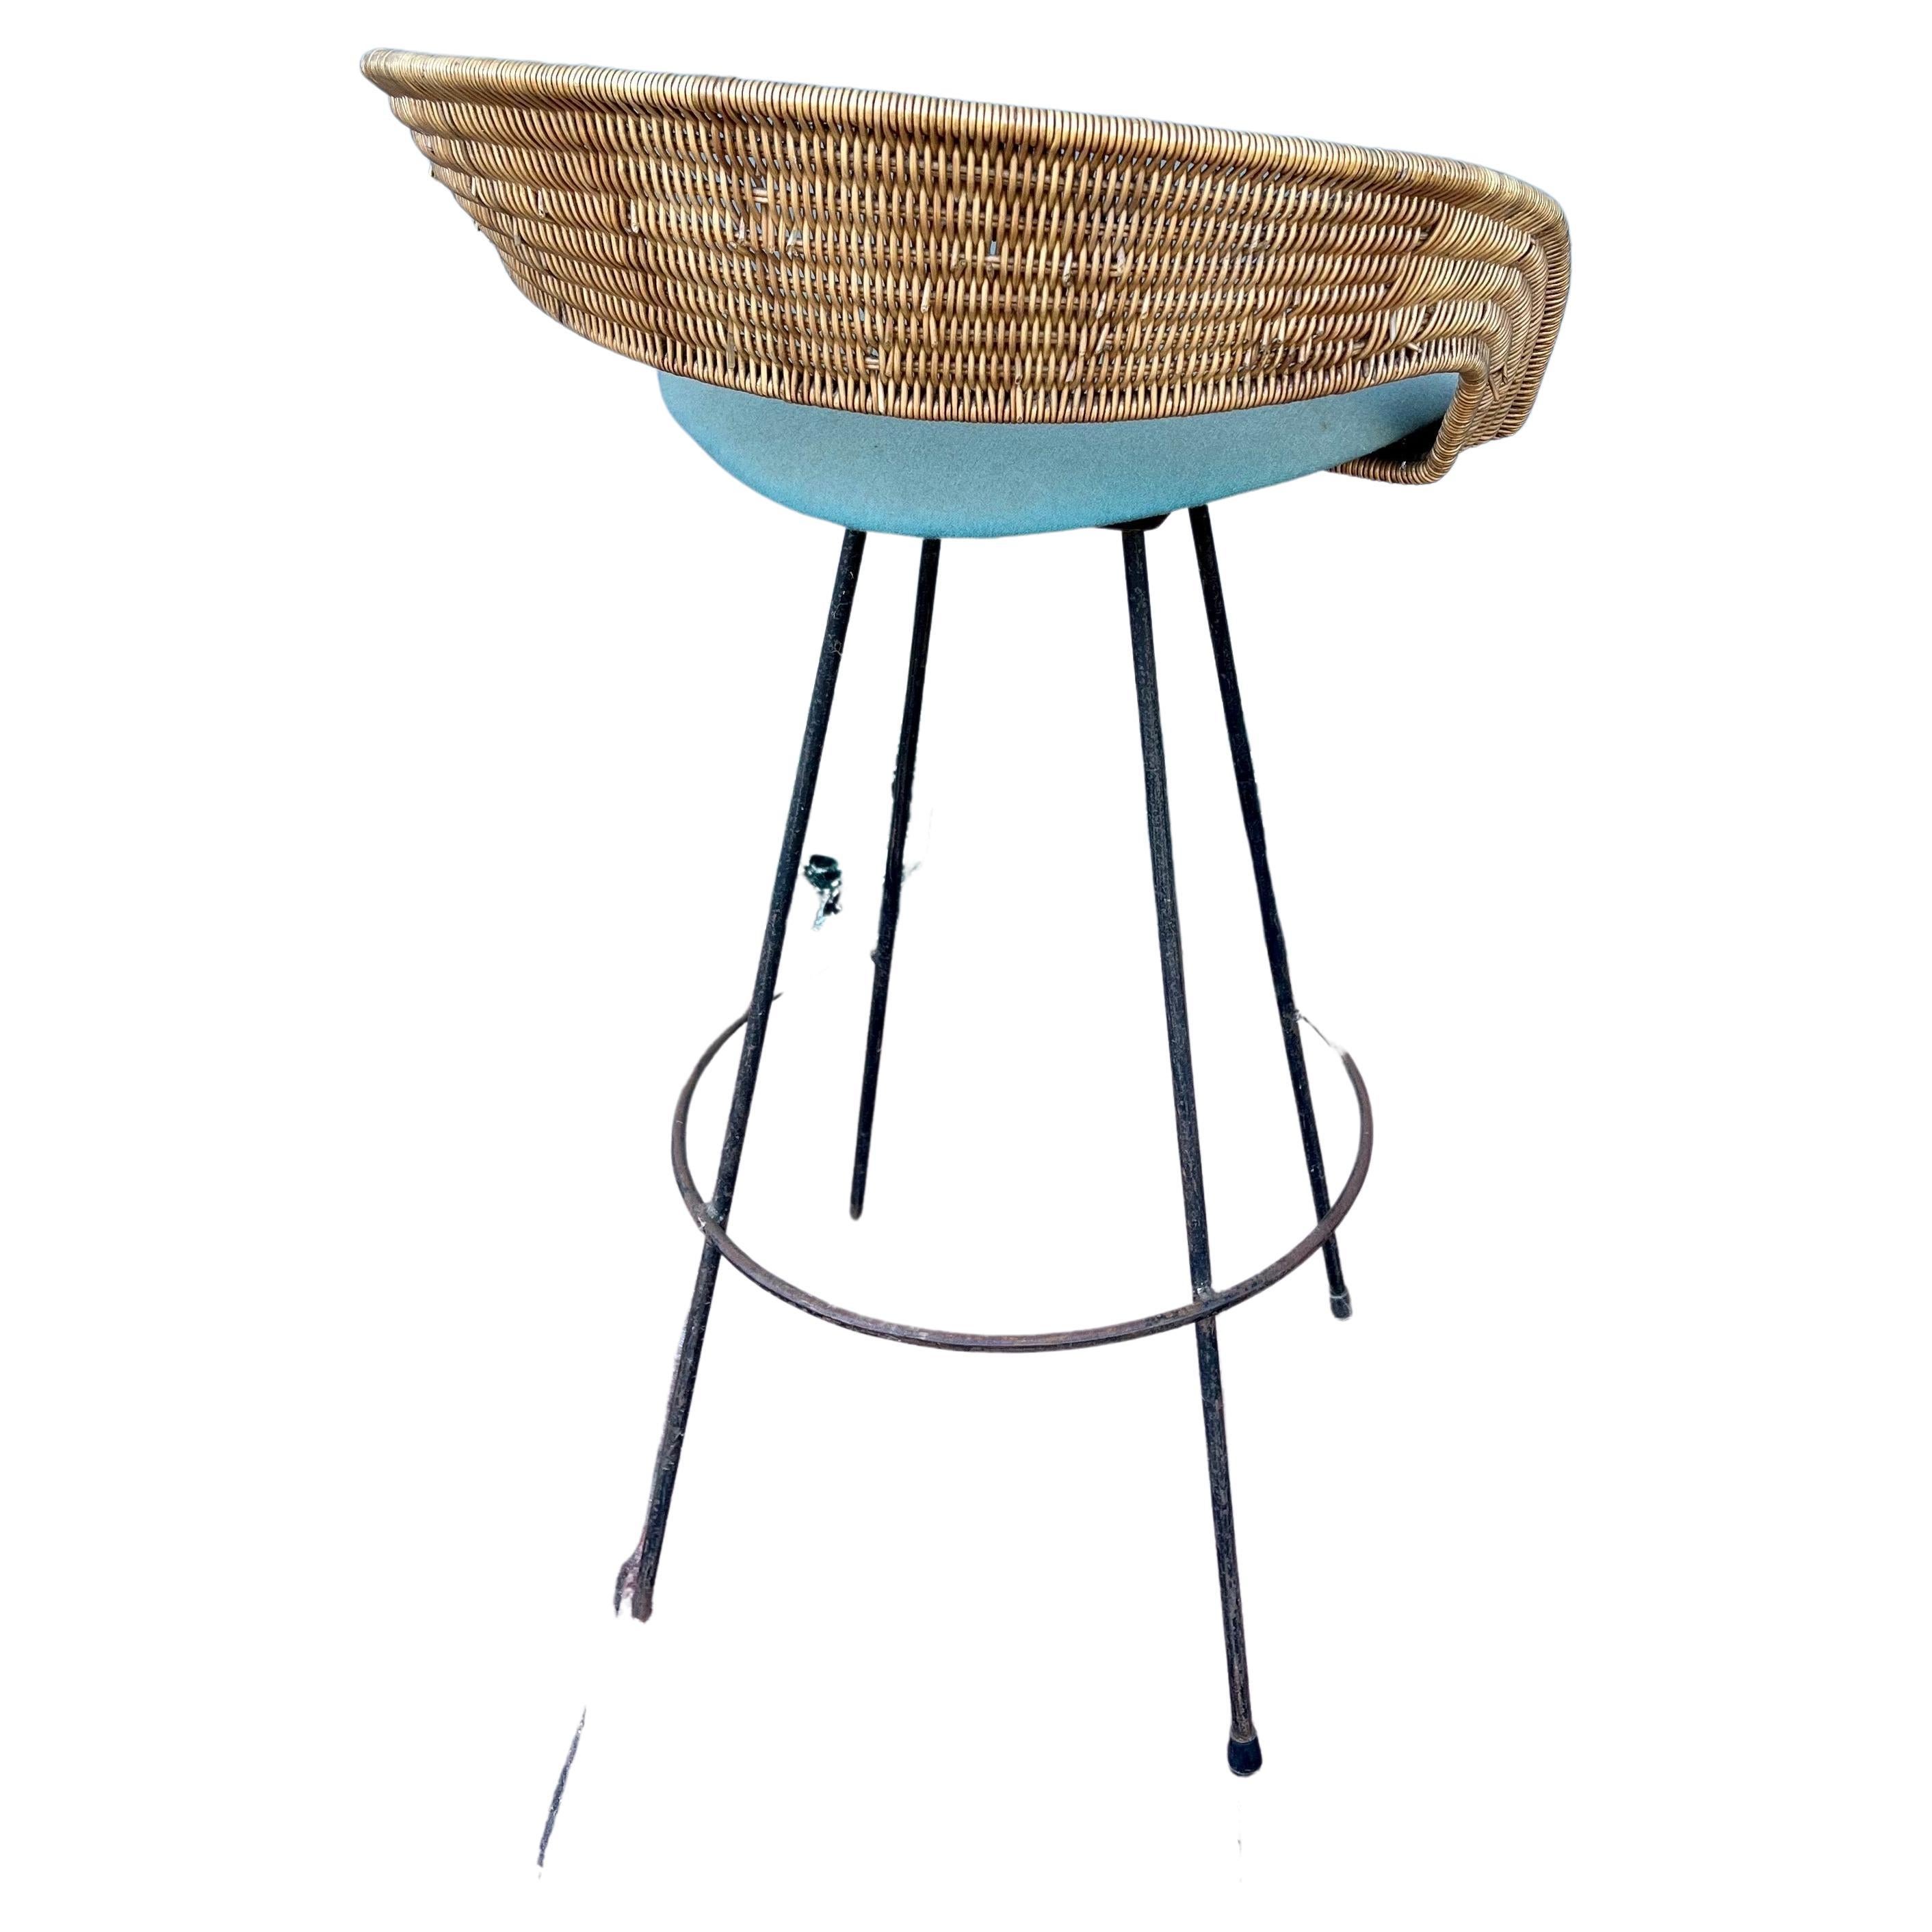 American Mid Century Atomic Age Iron & Wicker Barstool by Arthur Umanoff In Good Condition For Sale In San Diego, CA